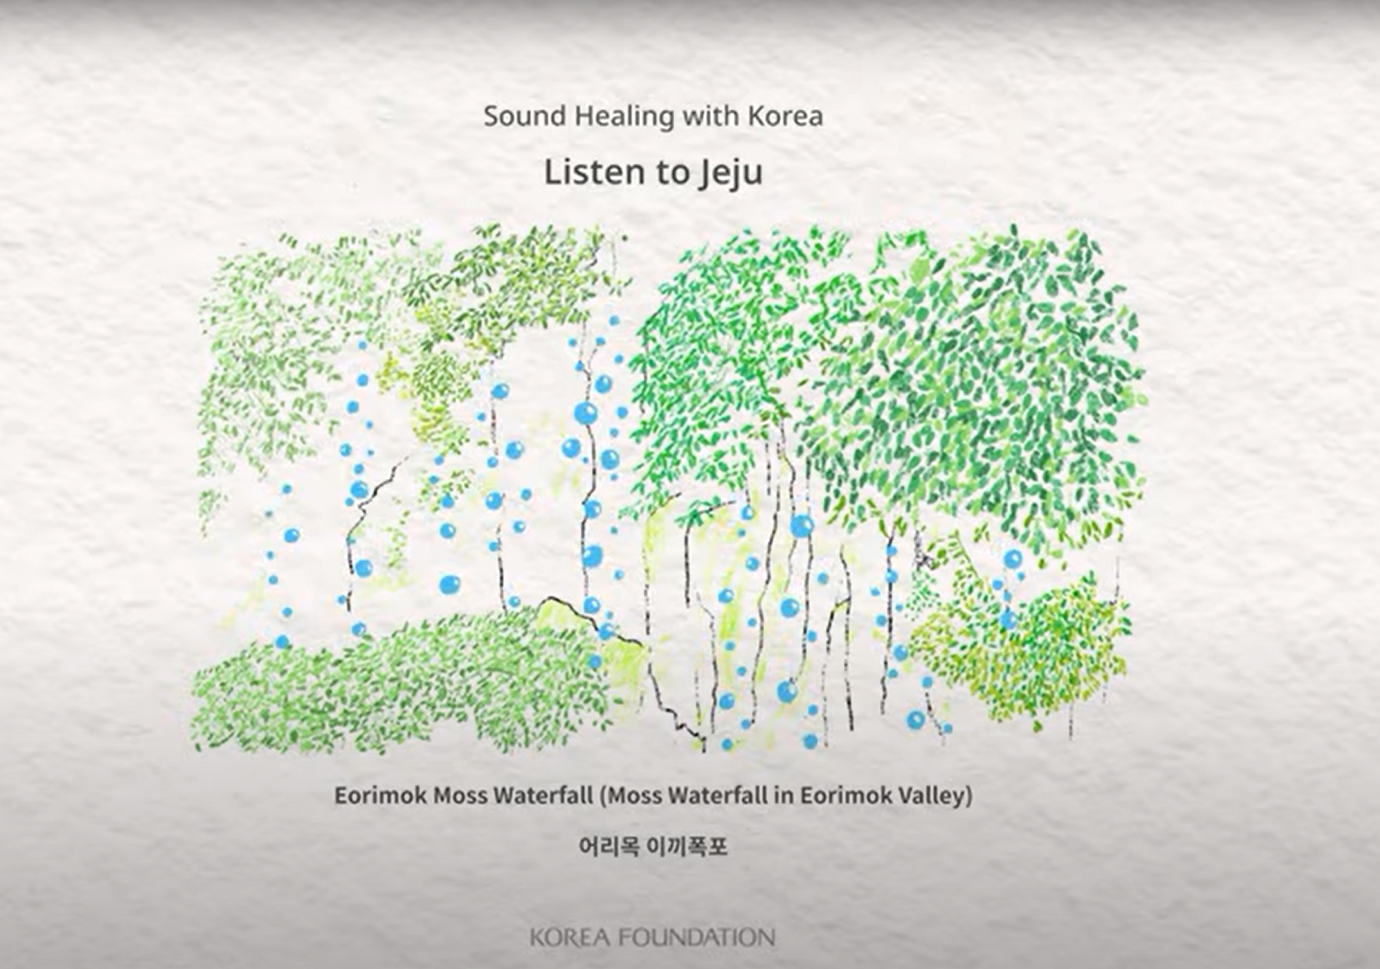 [ASMR] 2021 Sound <font color='red'>Healing</font> with Korea - Listen to Jeju | 2. Eorimok Moss Waterfall